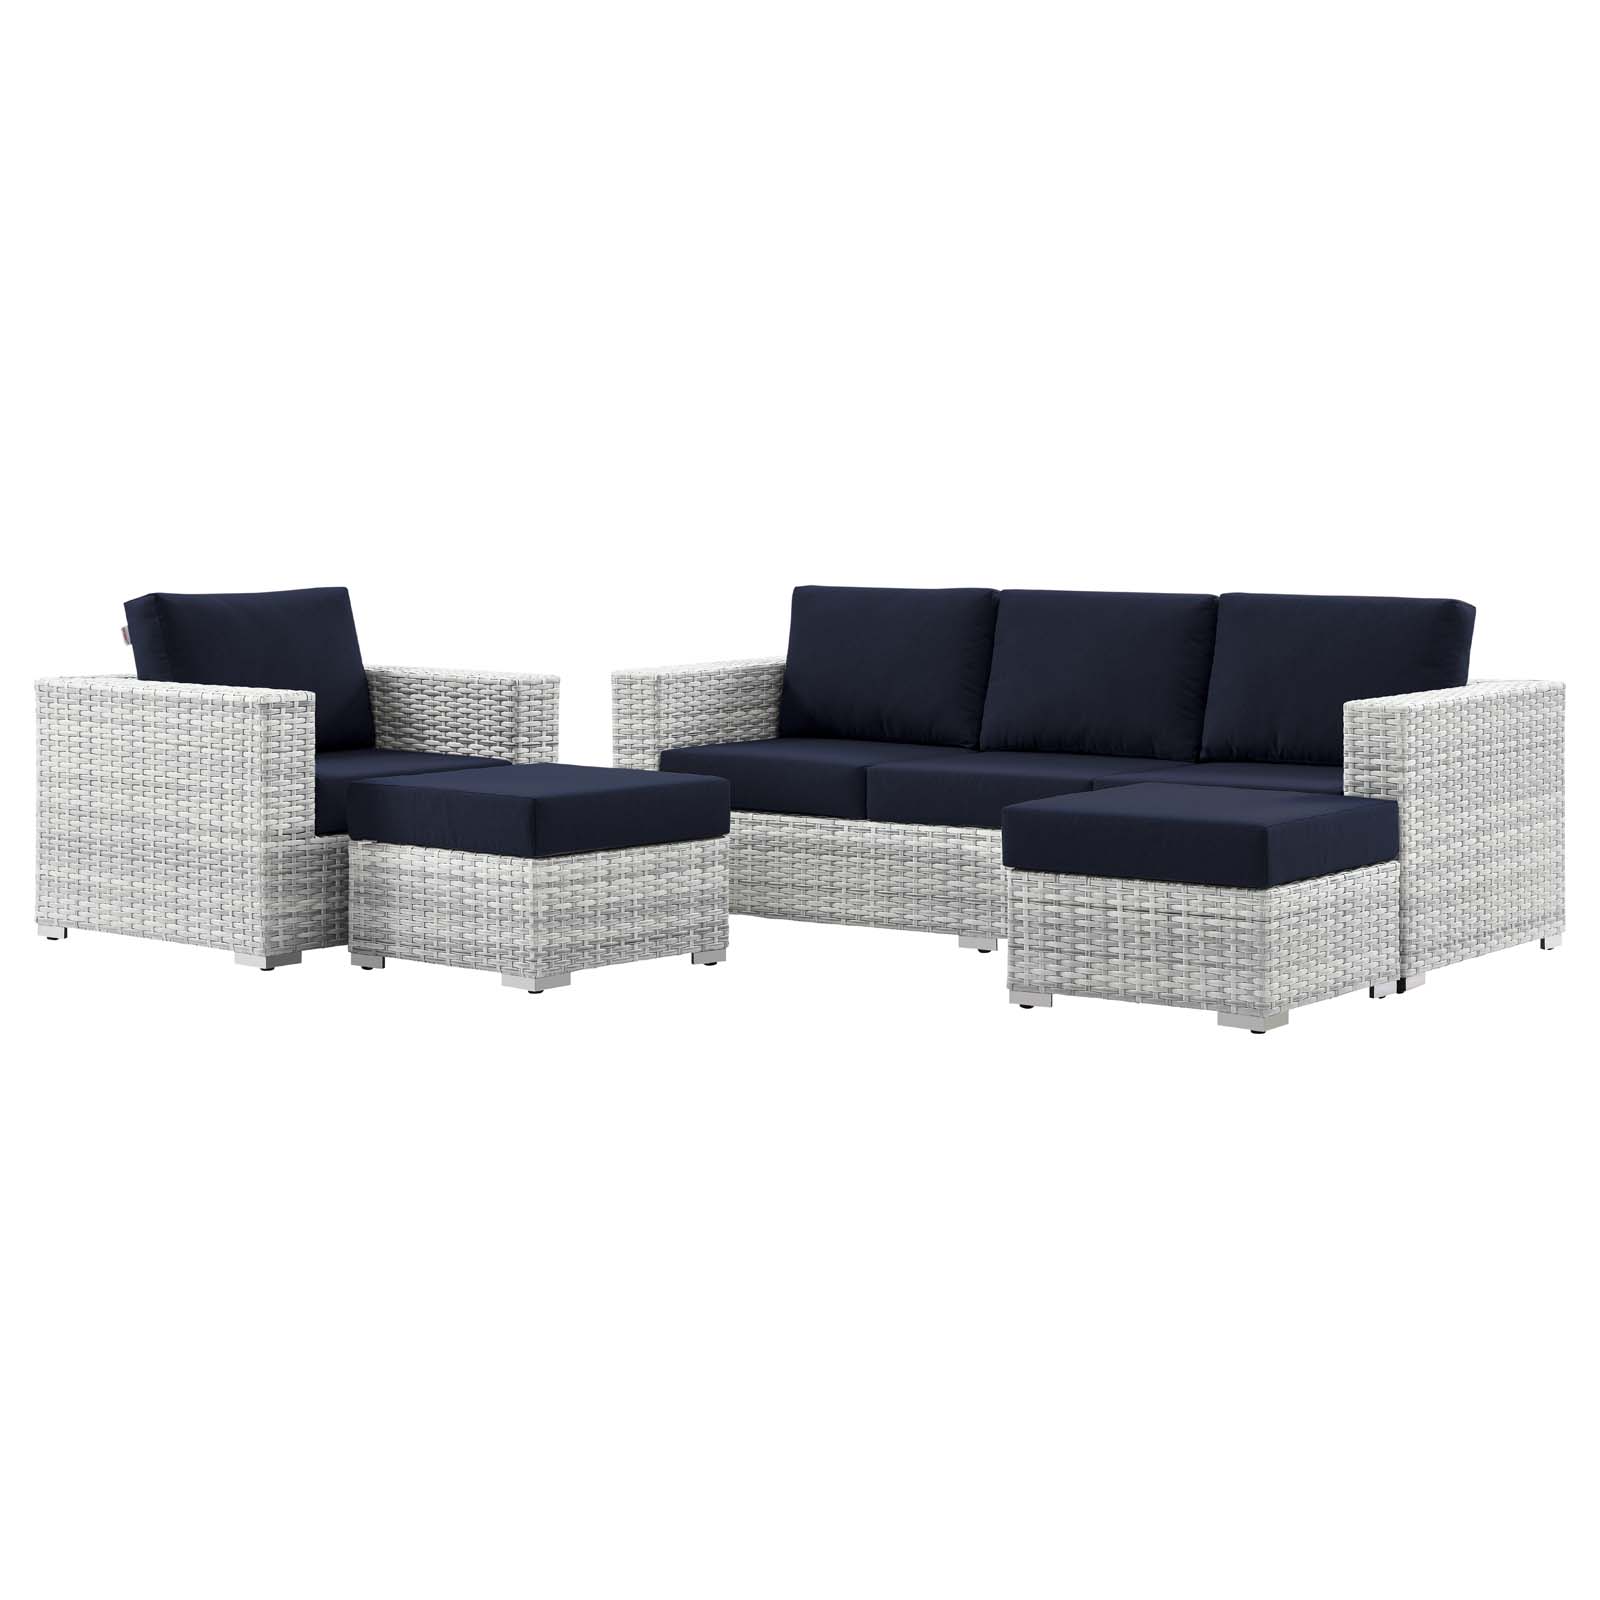 Lounge Sectional Sofa Chair Set, Rattan, Wicker, Light Grey Gray Blue Navy, Modern Contemporary Urban Design, Outdoor Patio Balcony Cafe Bistro Garden Furniture Hotel Hospitality - image 1 of 10